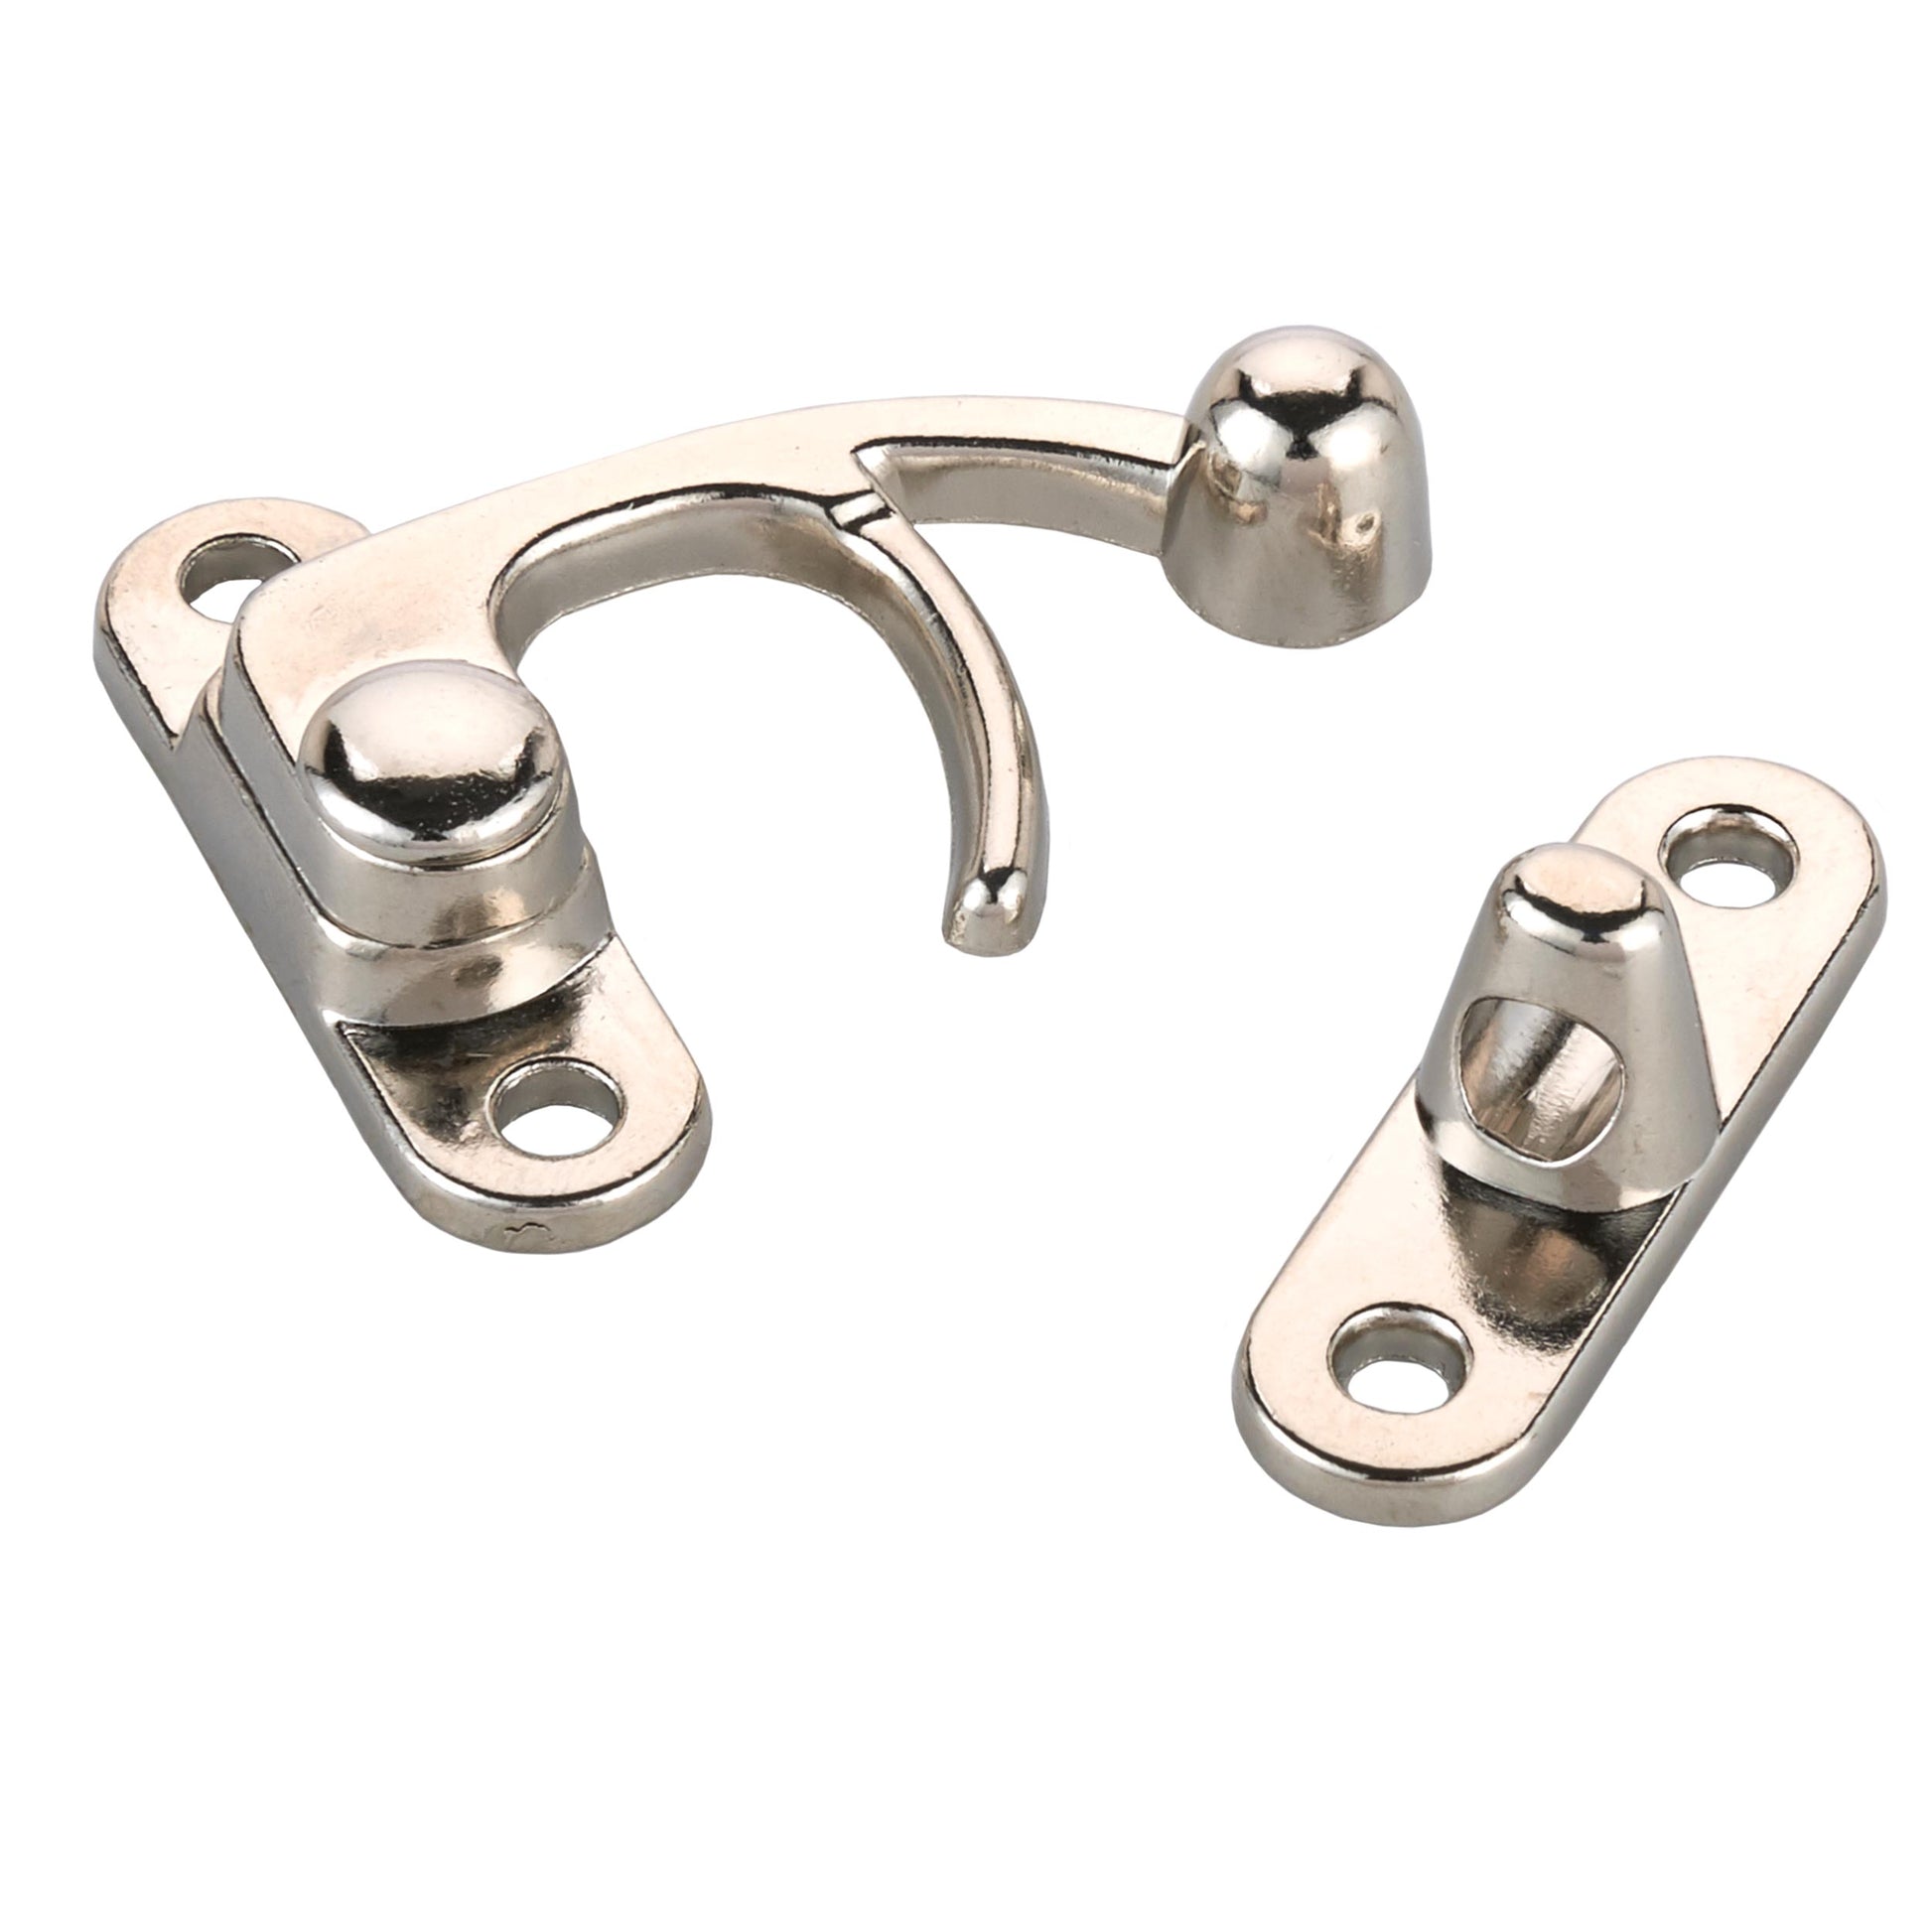 HIGHPOINT Hook Latch with Screws - Large - Nickel Finish